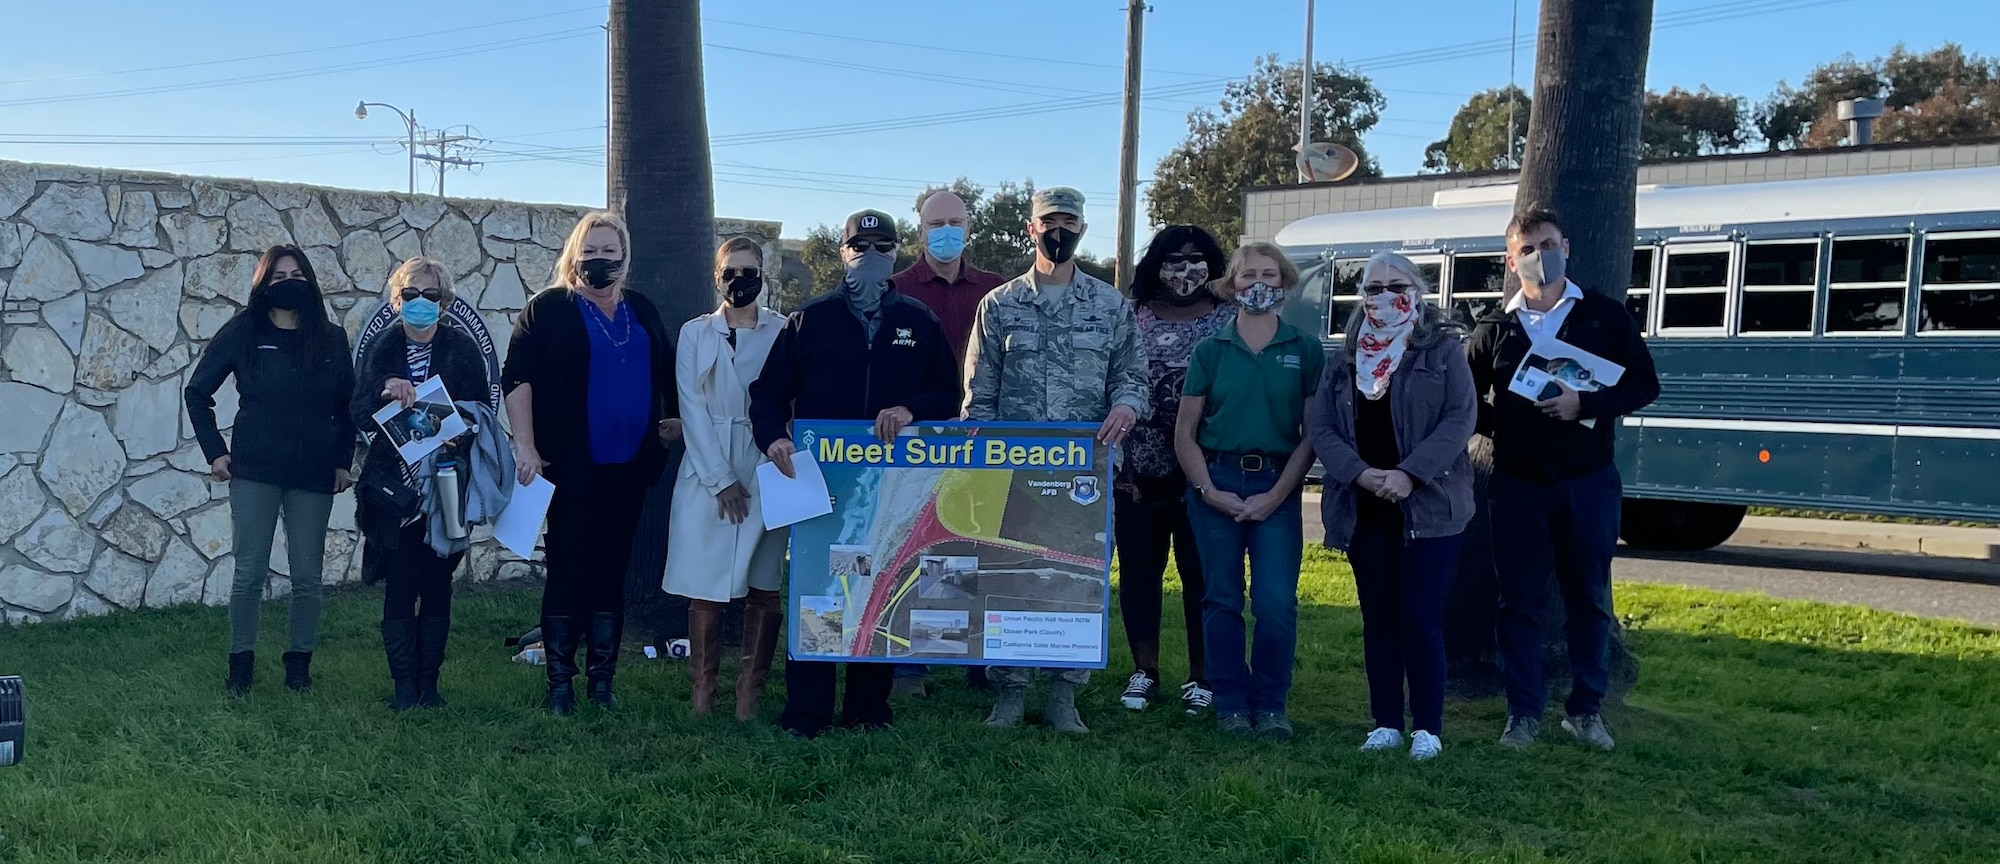 Vandenberg Leadership stands outside Vandenberg South Base gate with "Meet Surf Beach" sign following the community engagement on Feb. 25, 2021.